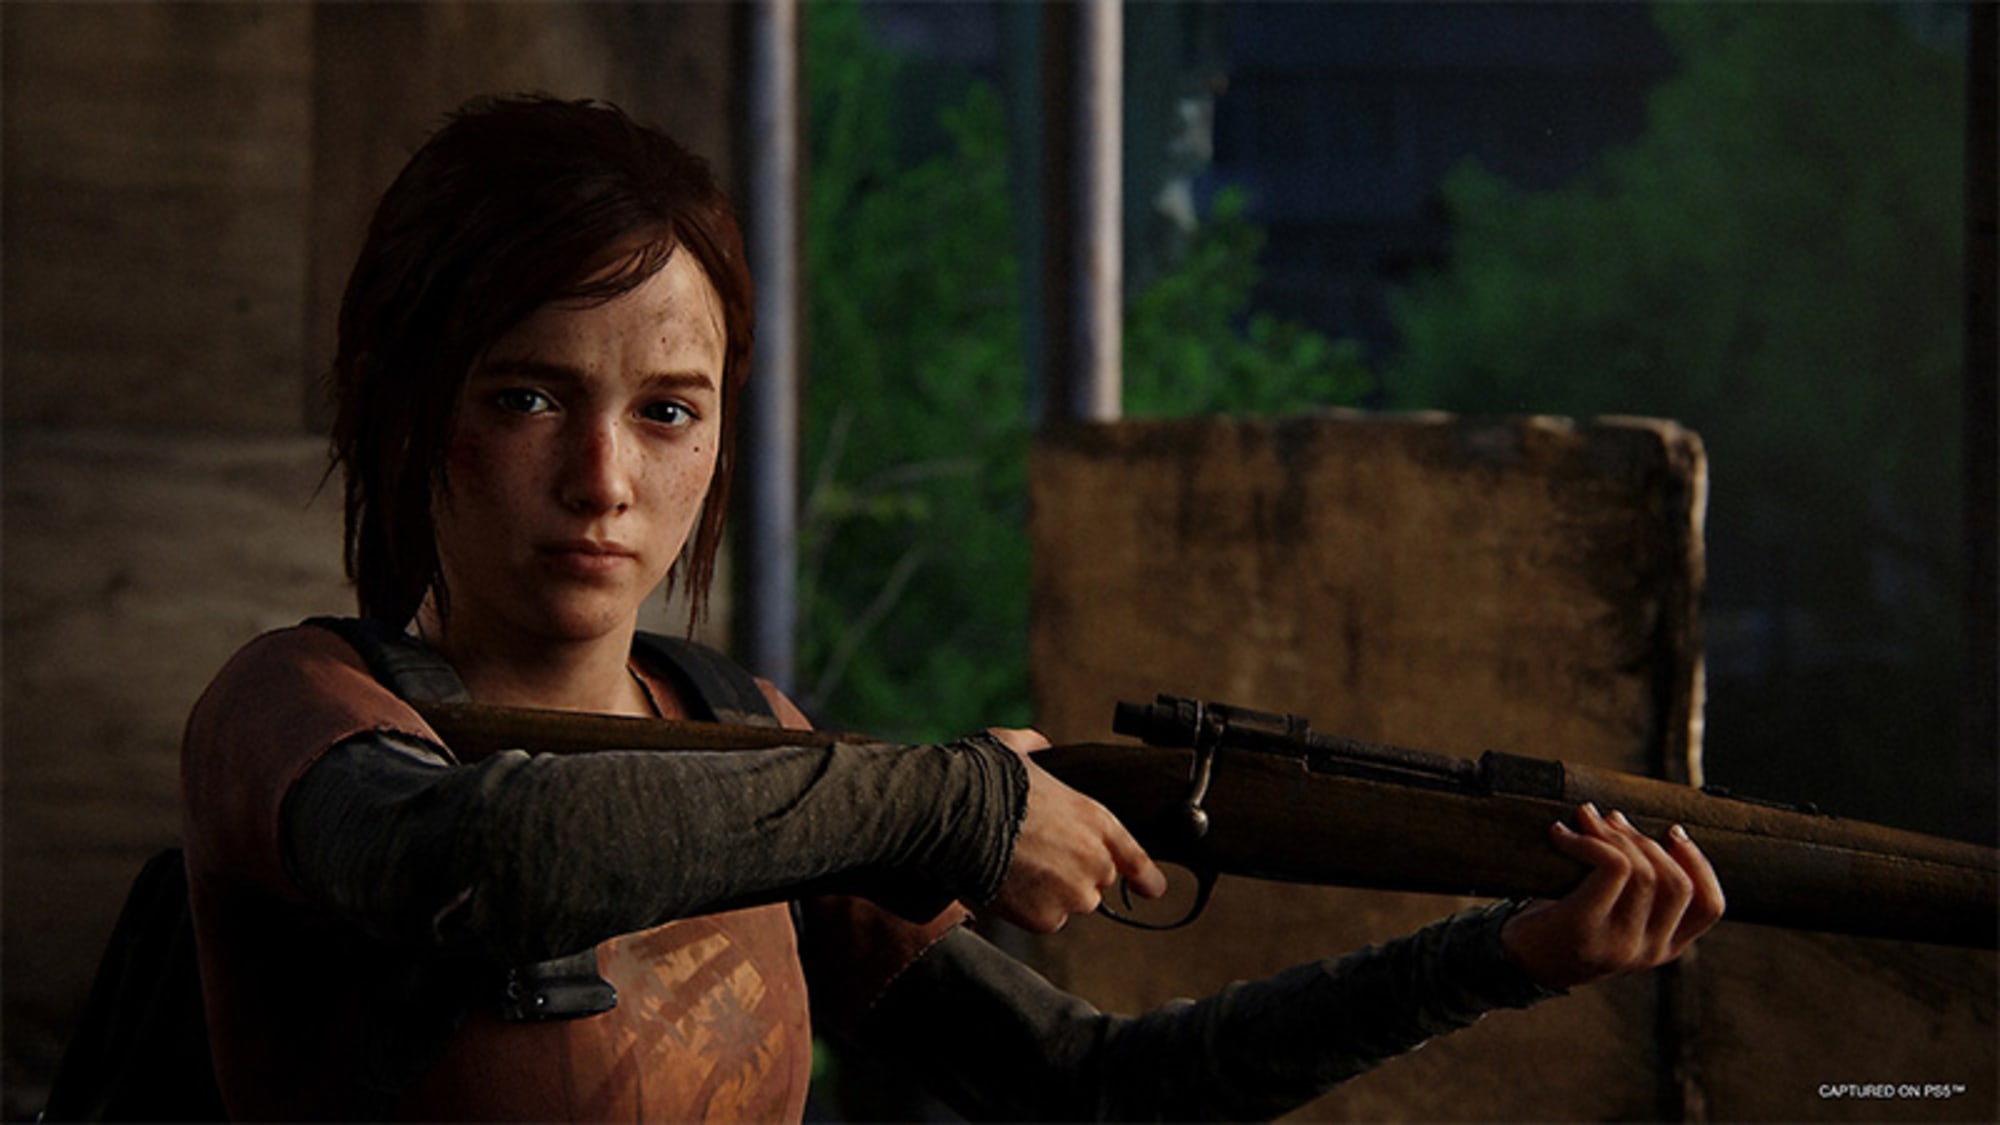 The Last of Us Part I: Everything you need to know about the Firefly  Edition remake and how to pre-order